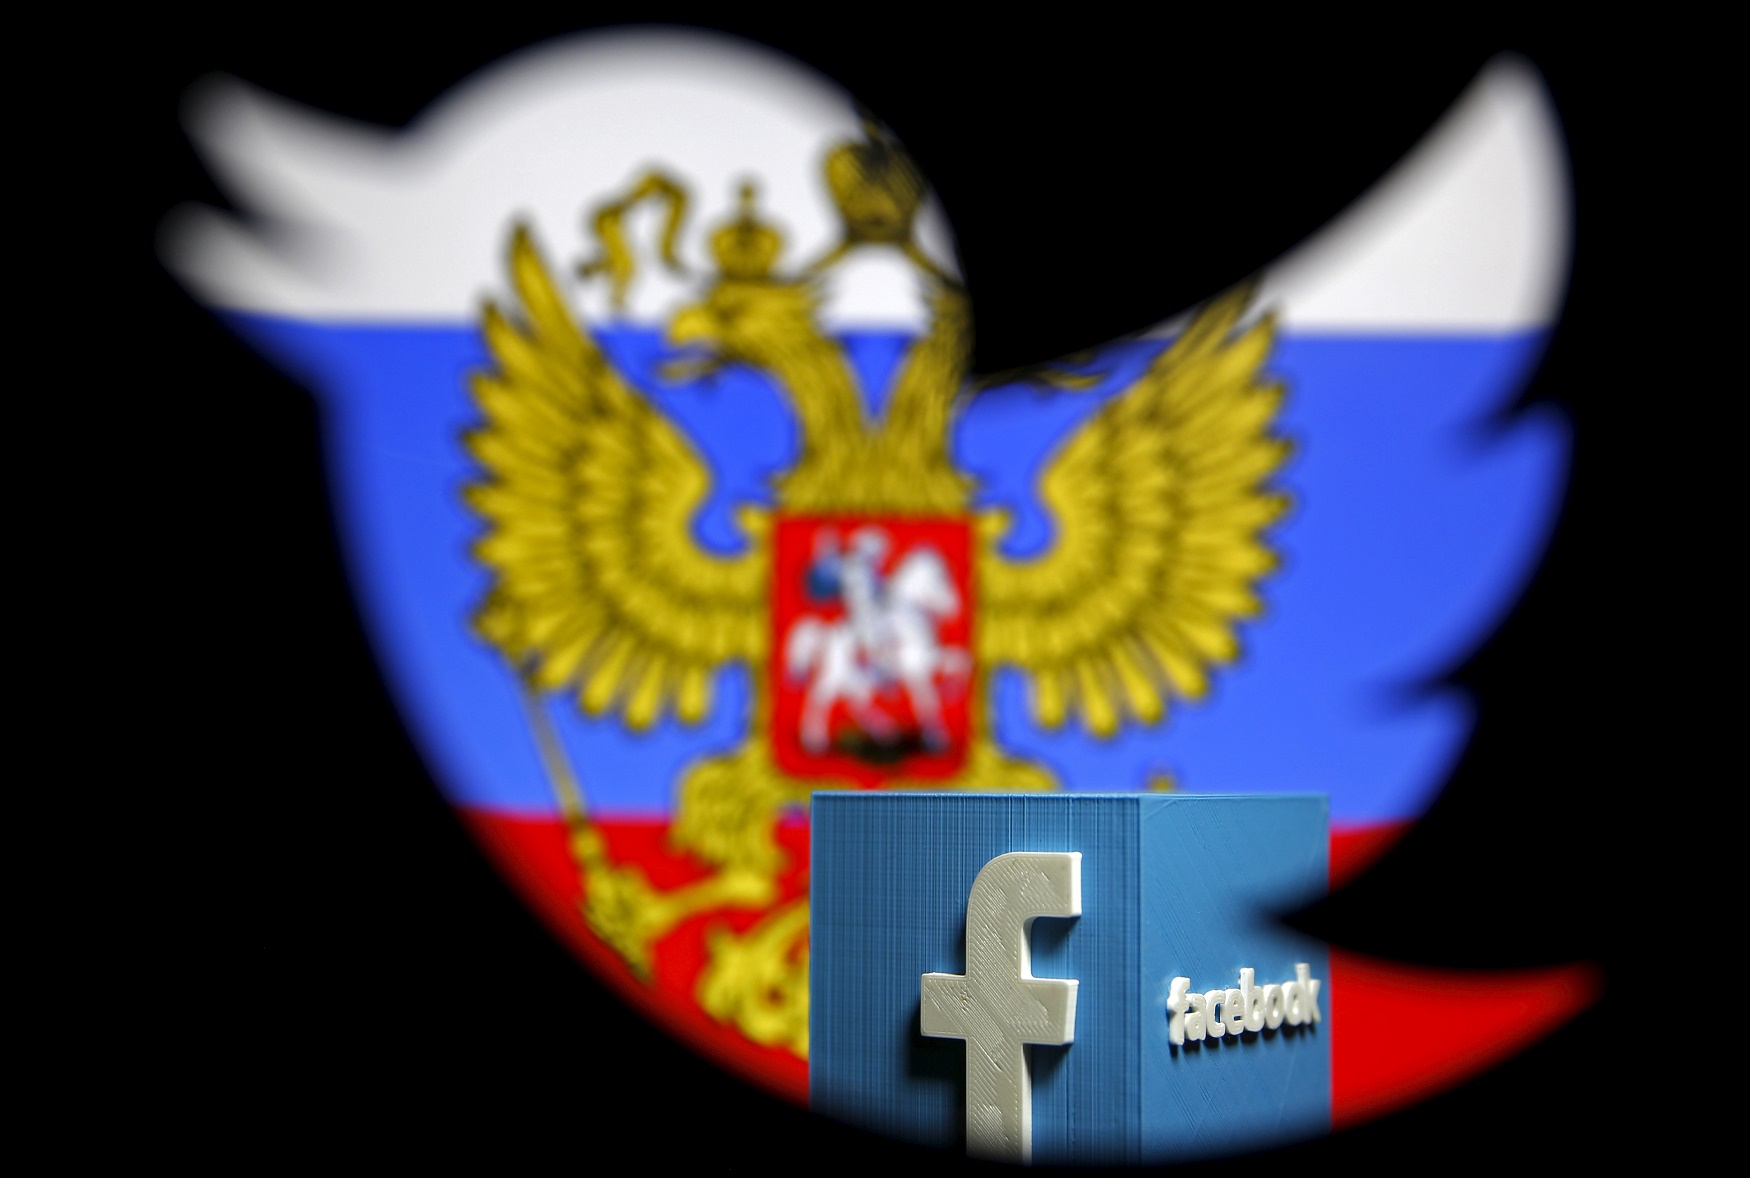 A Russian flag and a 3D model of the Facebook logo is seen through a cutout of the Twitter logo in this photo illustration taken in Zenica